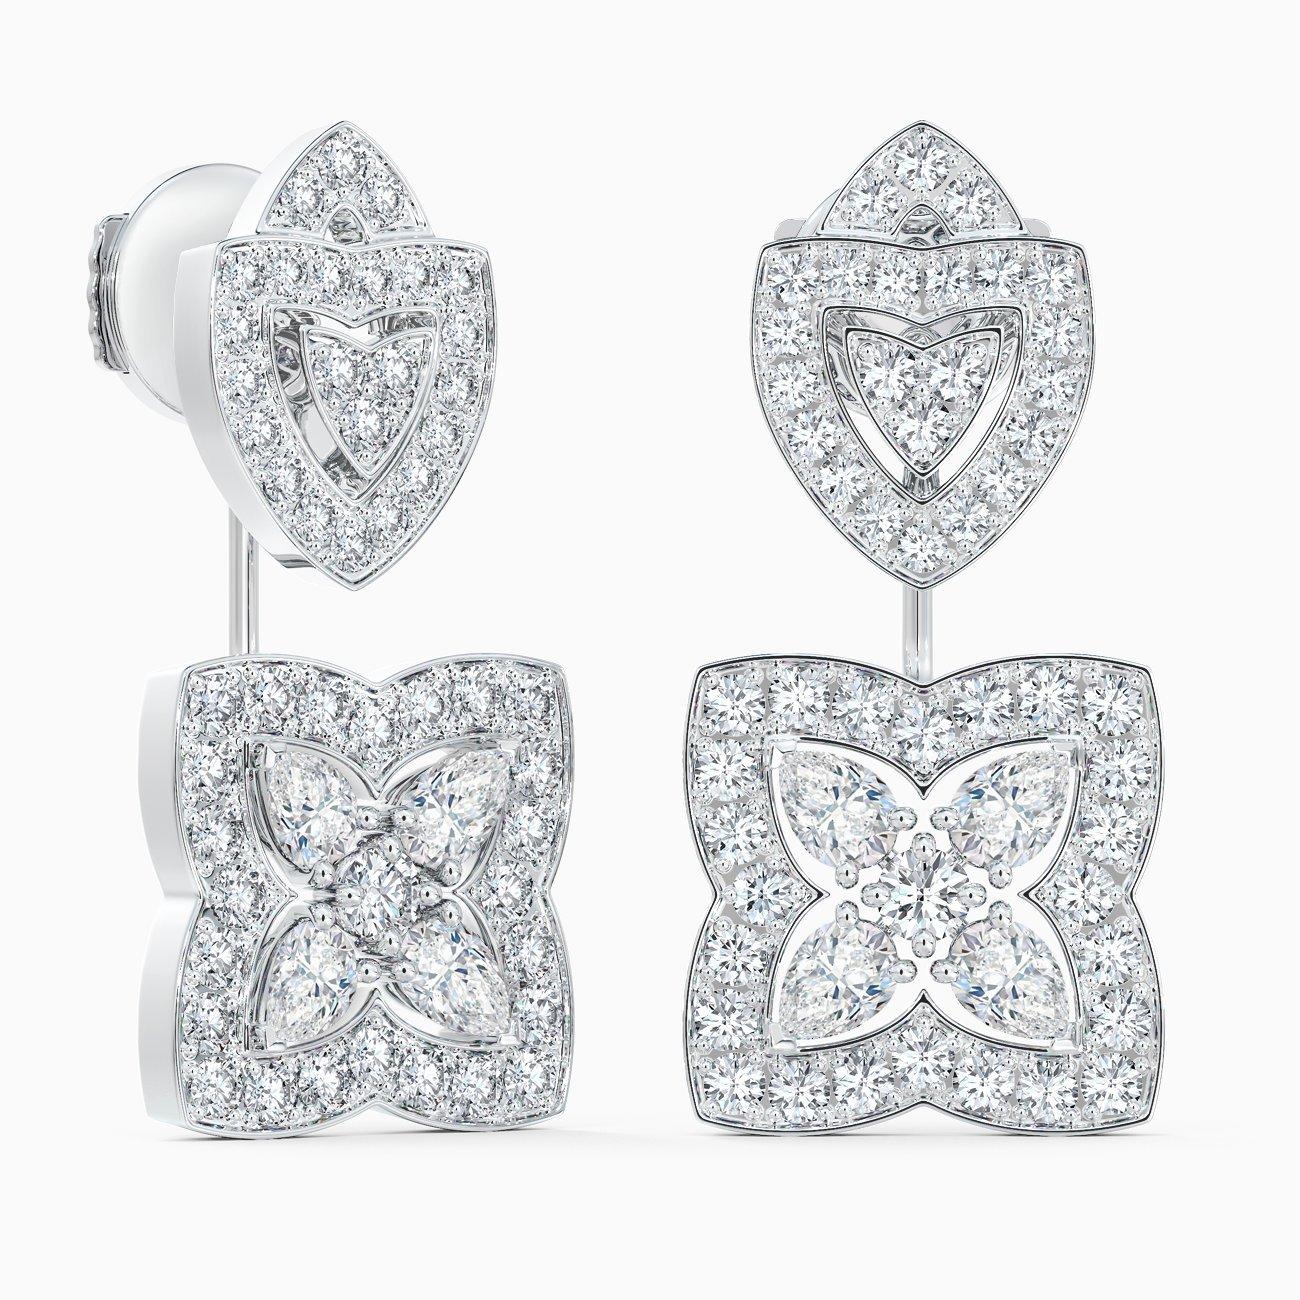 DE BEERS LAUNCHES NEW ONLINE STORE FOR ITS DIAMOND JEWELRY